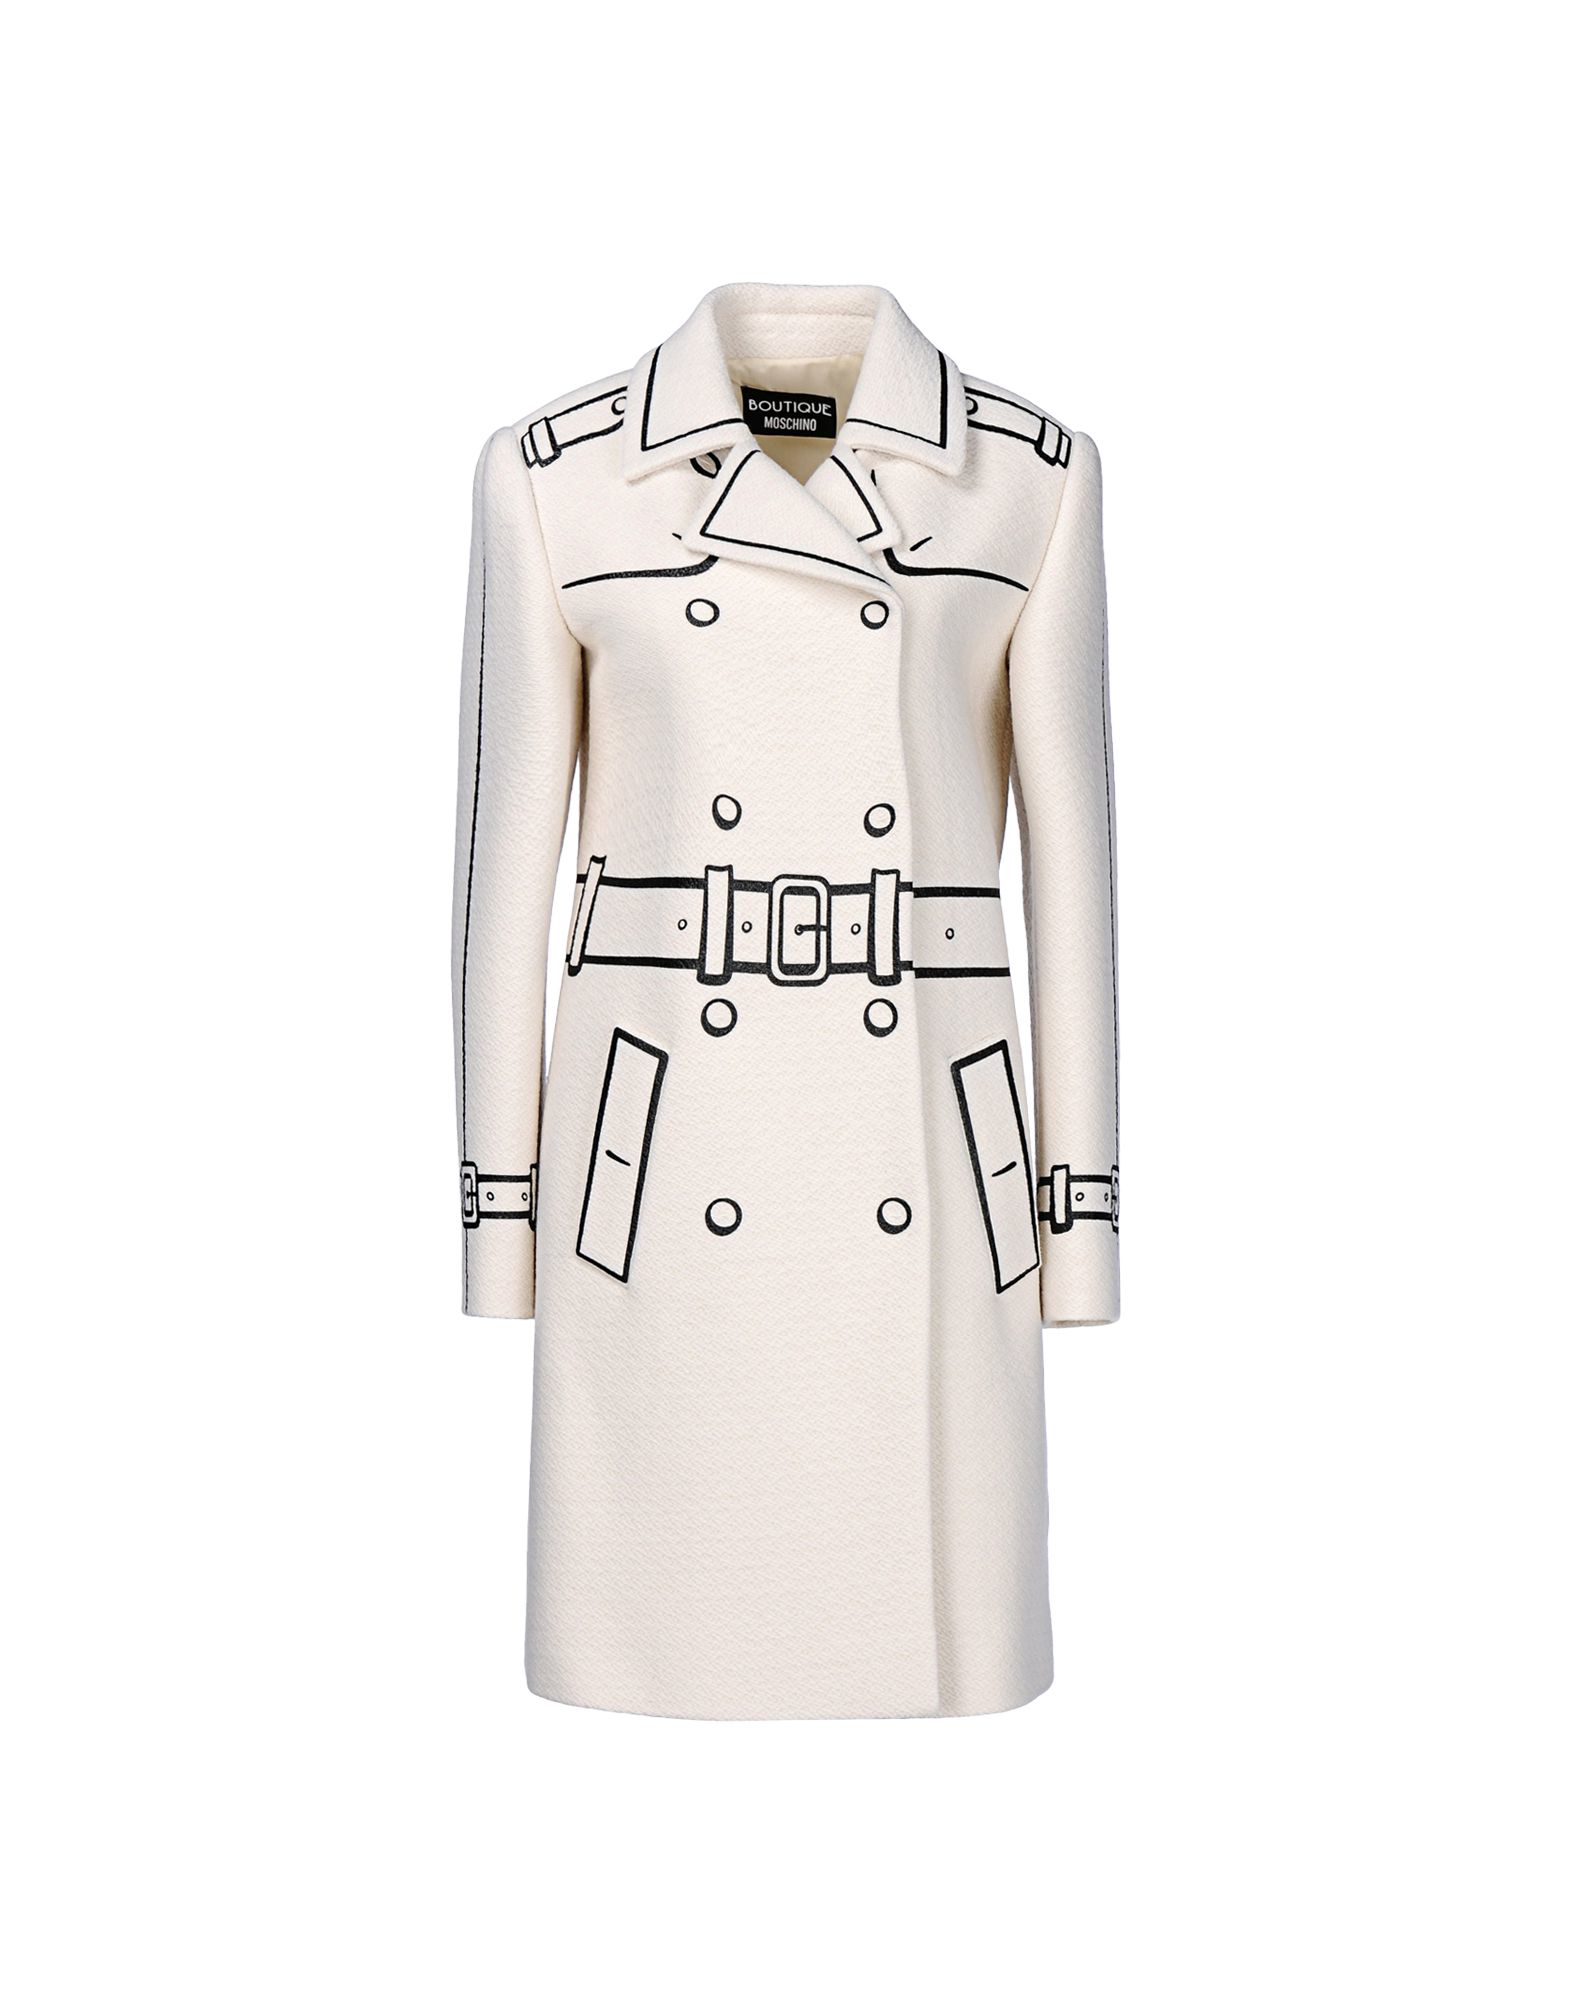 Lyst - Boutique Moschino Trench Printed Coat in Natural